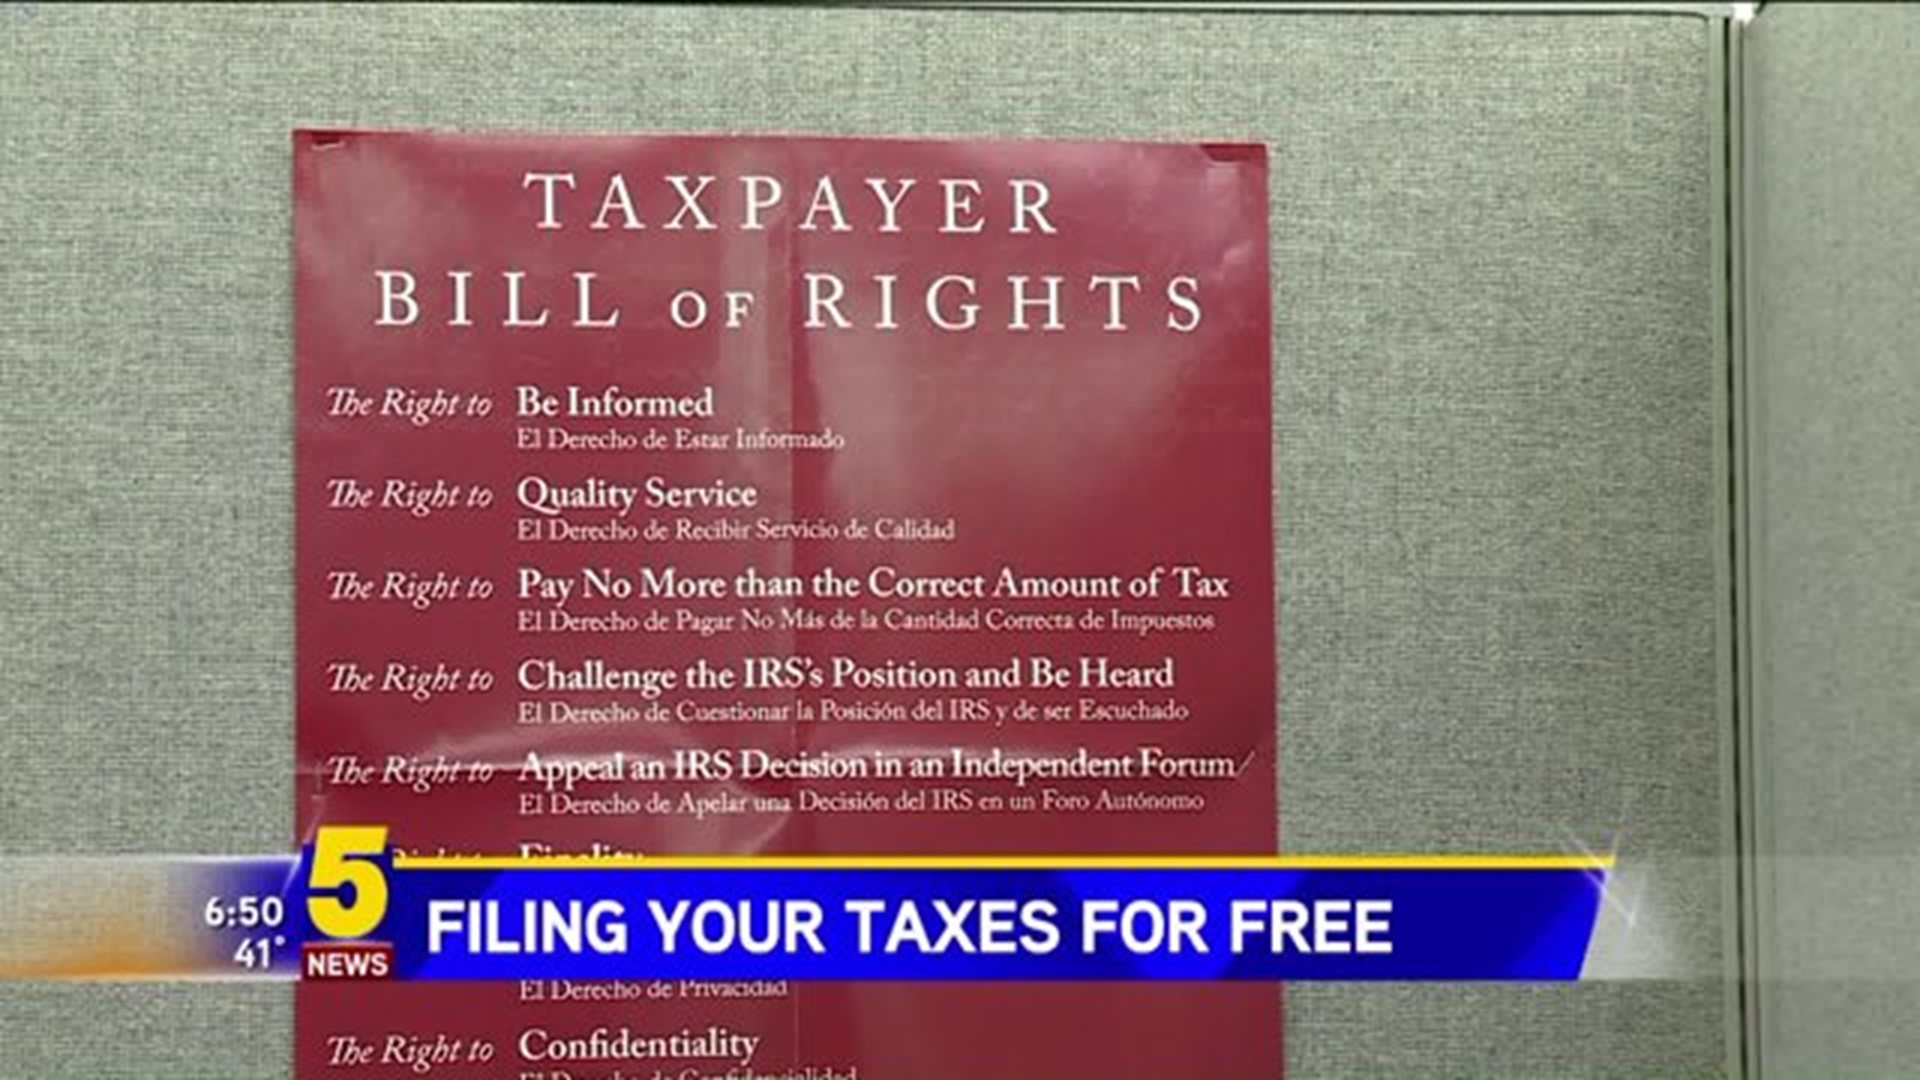 FILING TAXES FOR FREE